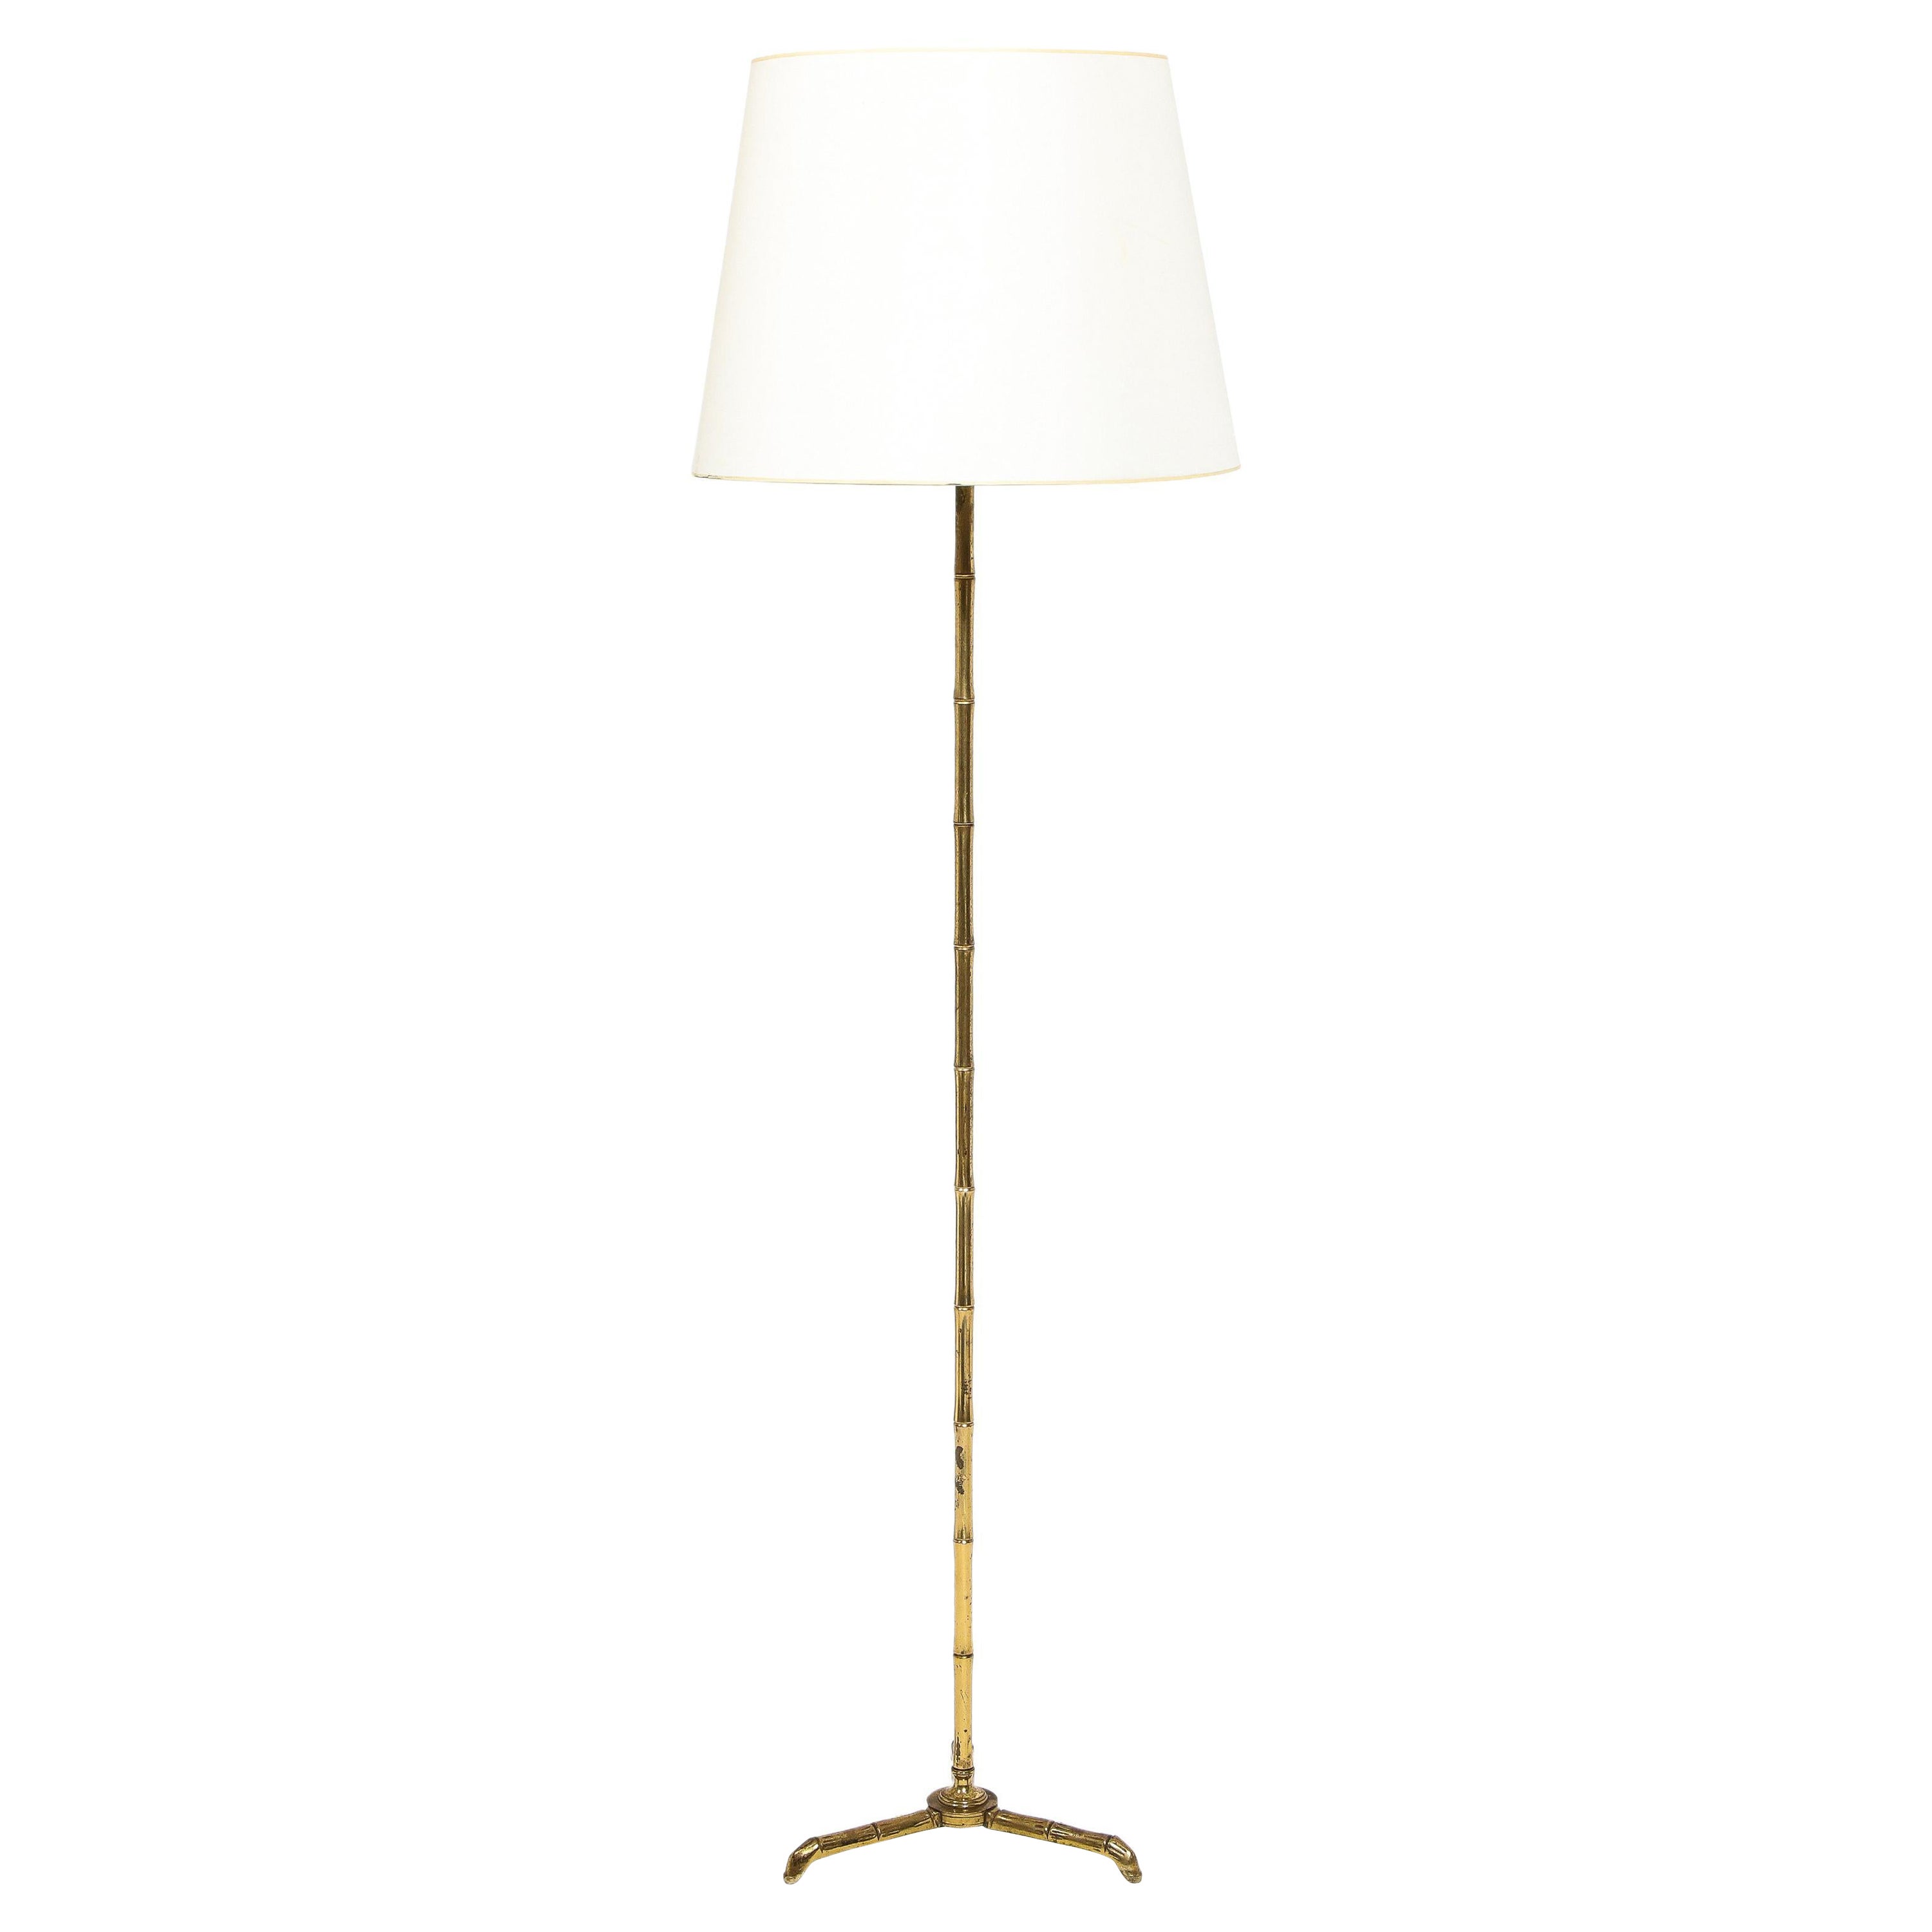 Cast Brass Faux Bamboo Floor Lamp, France 1960's